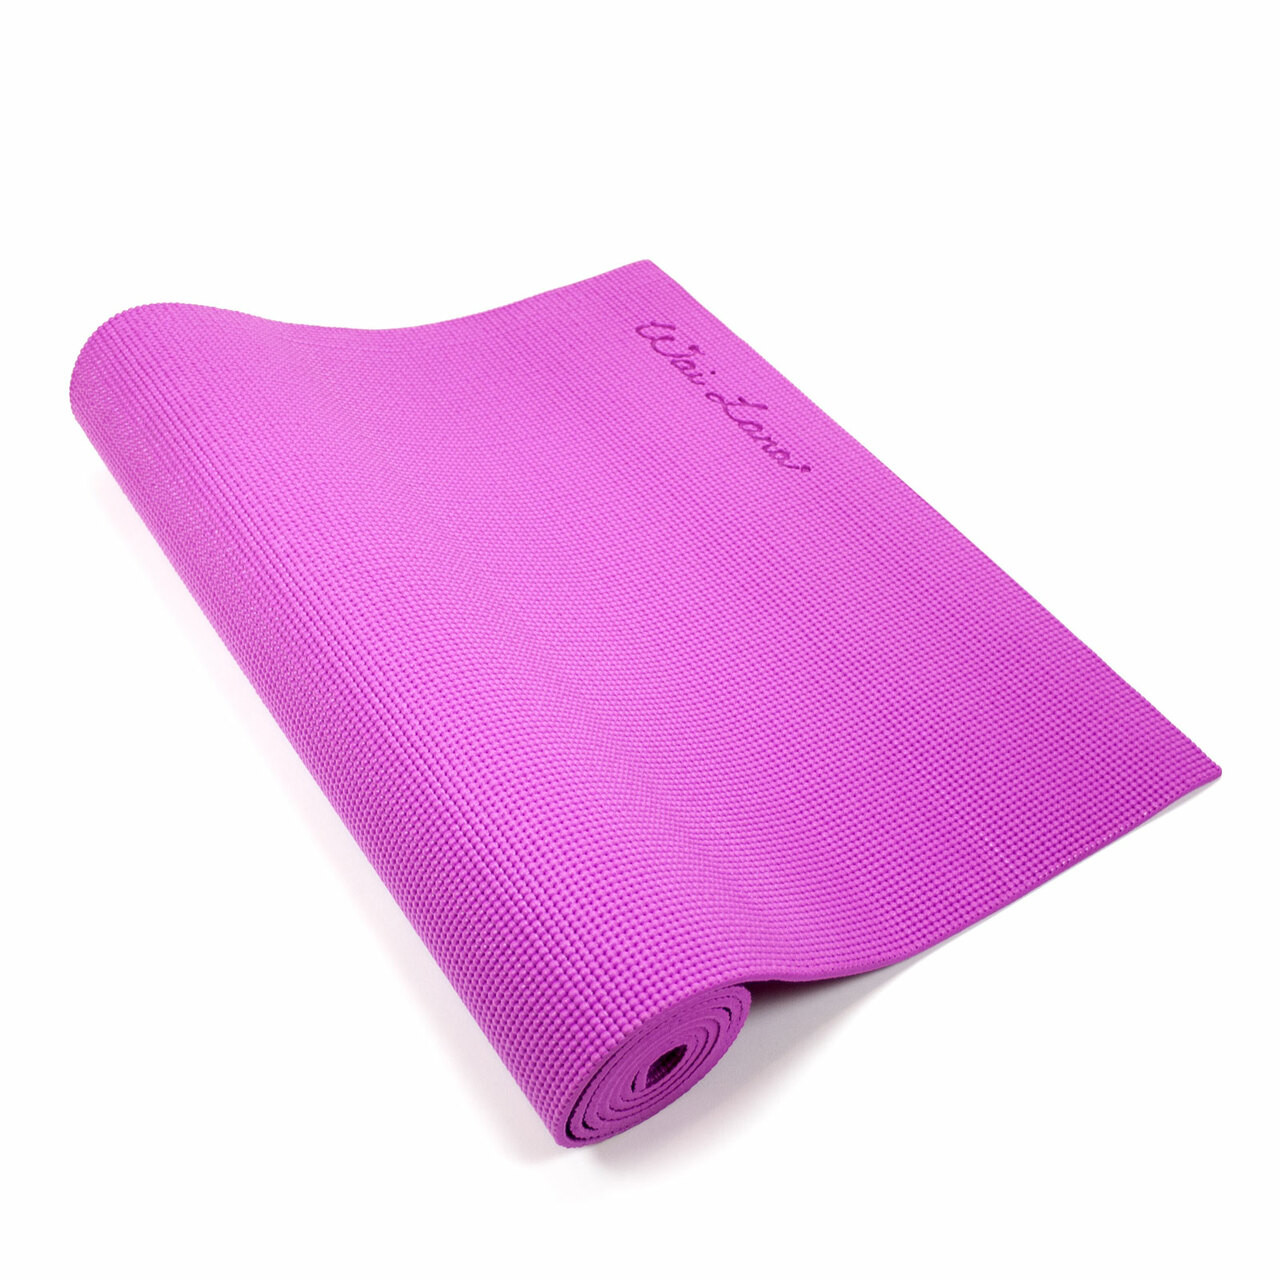 WZHIJUN Yoga Mat 20mm Super Thick High Density Ripple Non-Slip Suitable for  All Yoga Mats with Straps Pilates and Floor Mats (Color : Pink, Size 